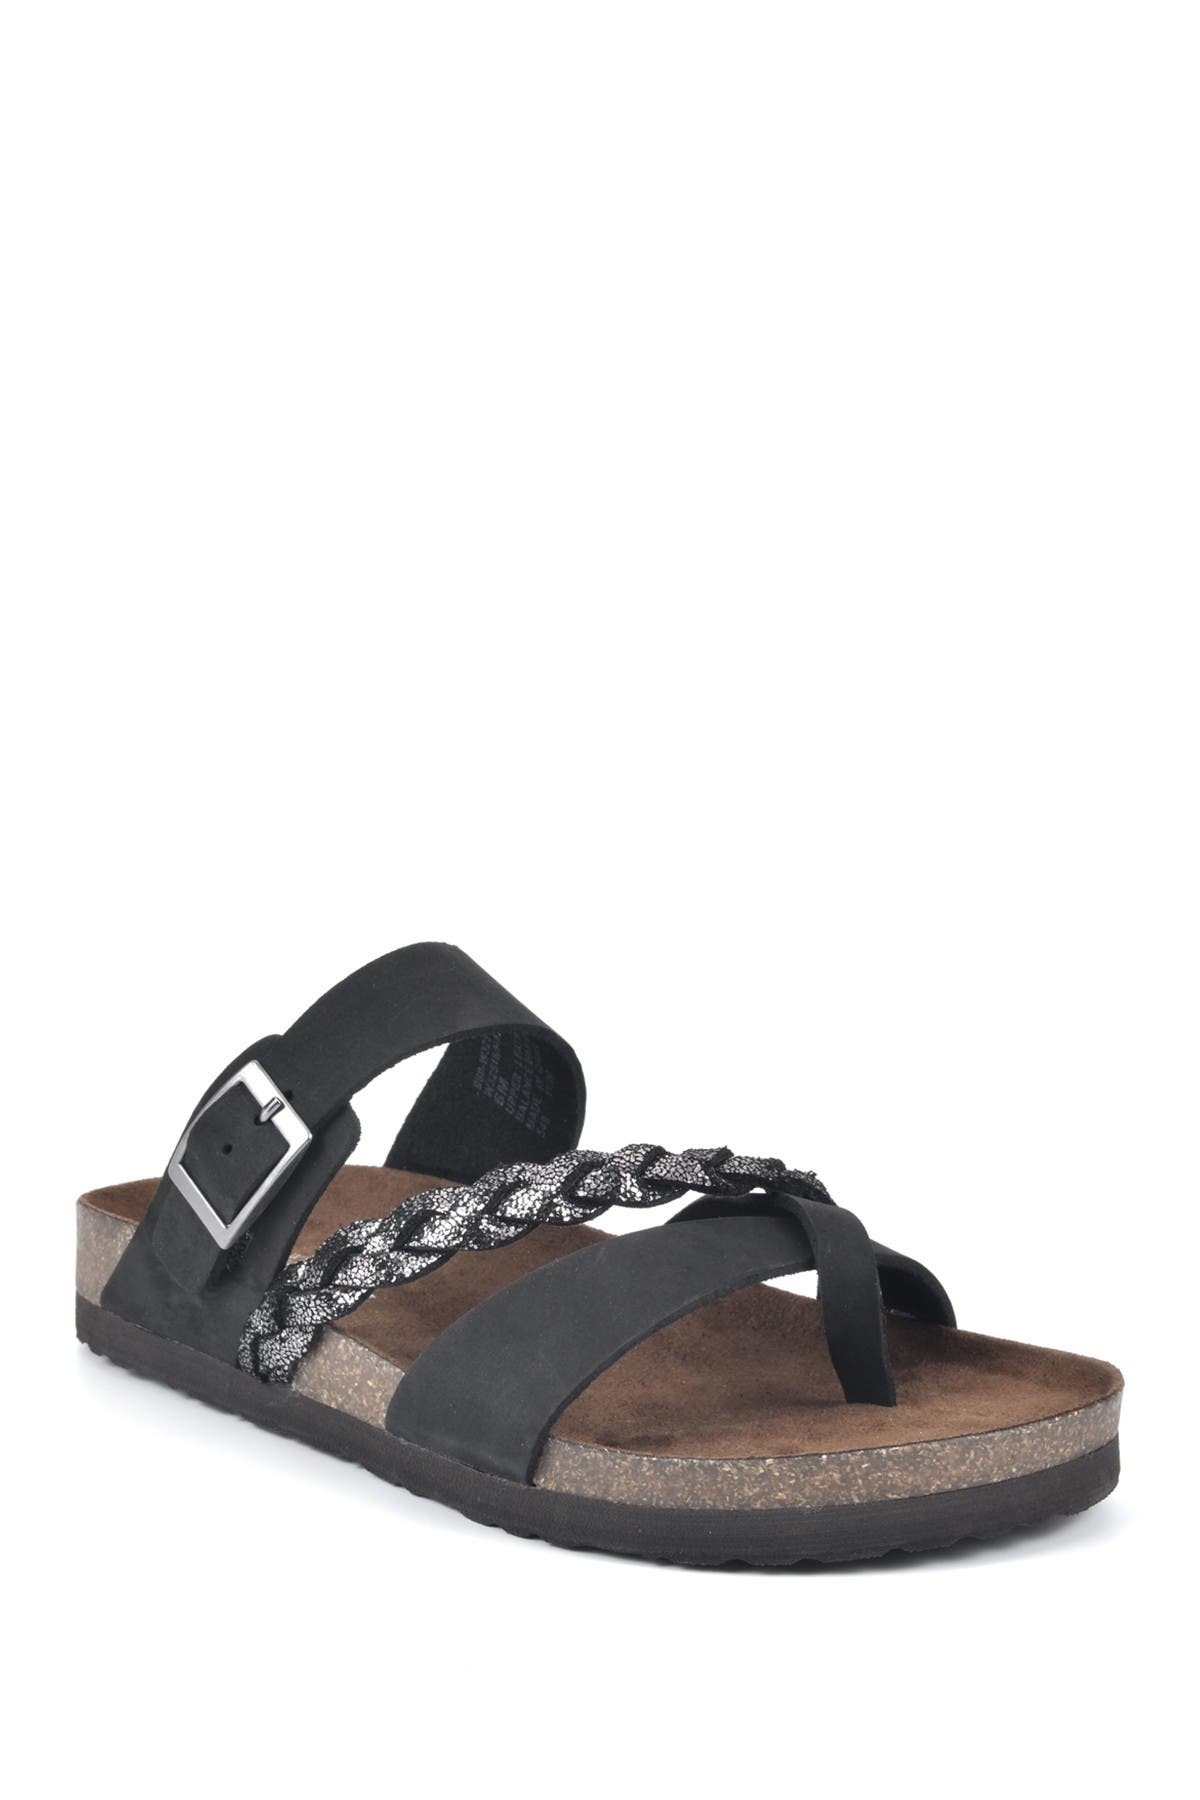 White Mountain Footwear Hazy Leather Footbed Sandal In Black/pewter/multi